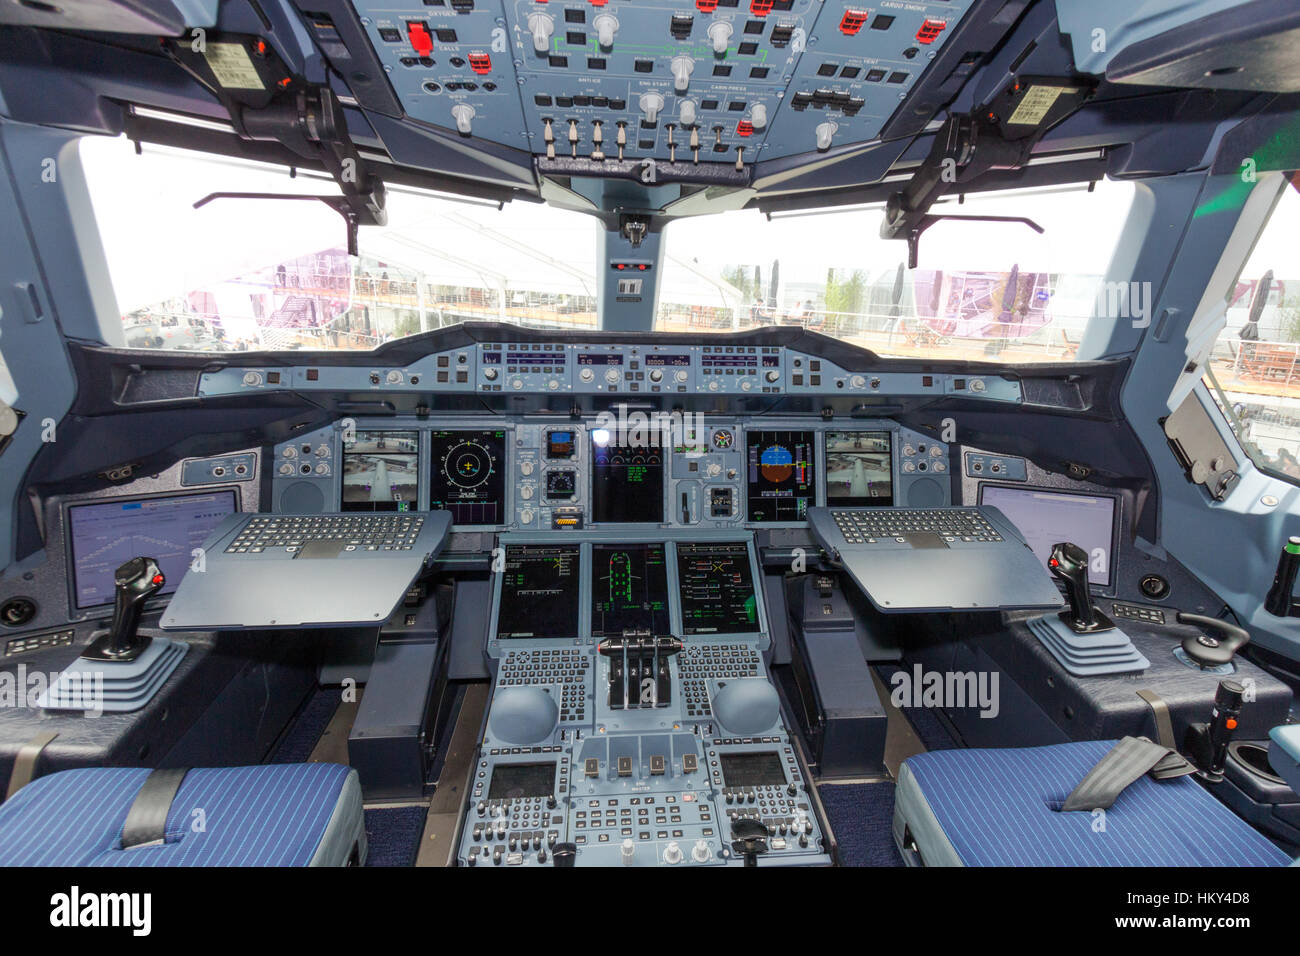 PARIS - JUN 18, 2015: Airbus A380 cockpit. The A380 is the largest passenger airliner in the world. Stock Photo